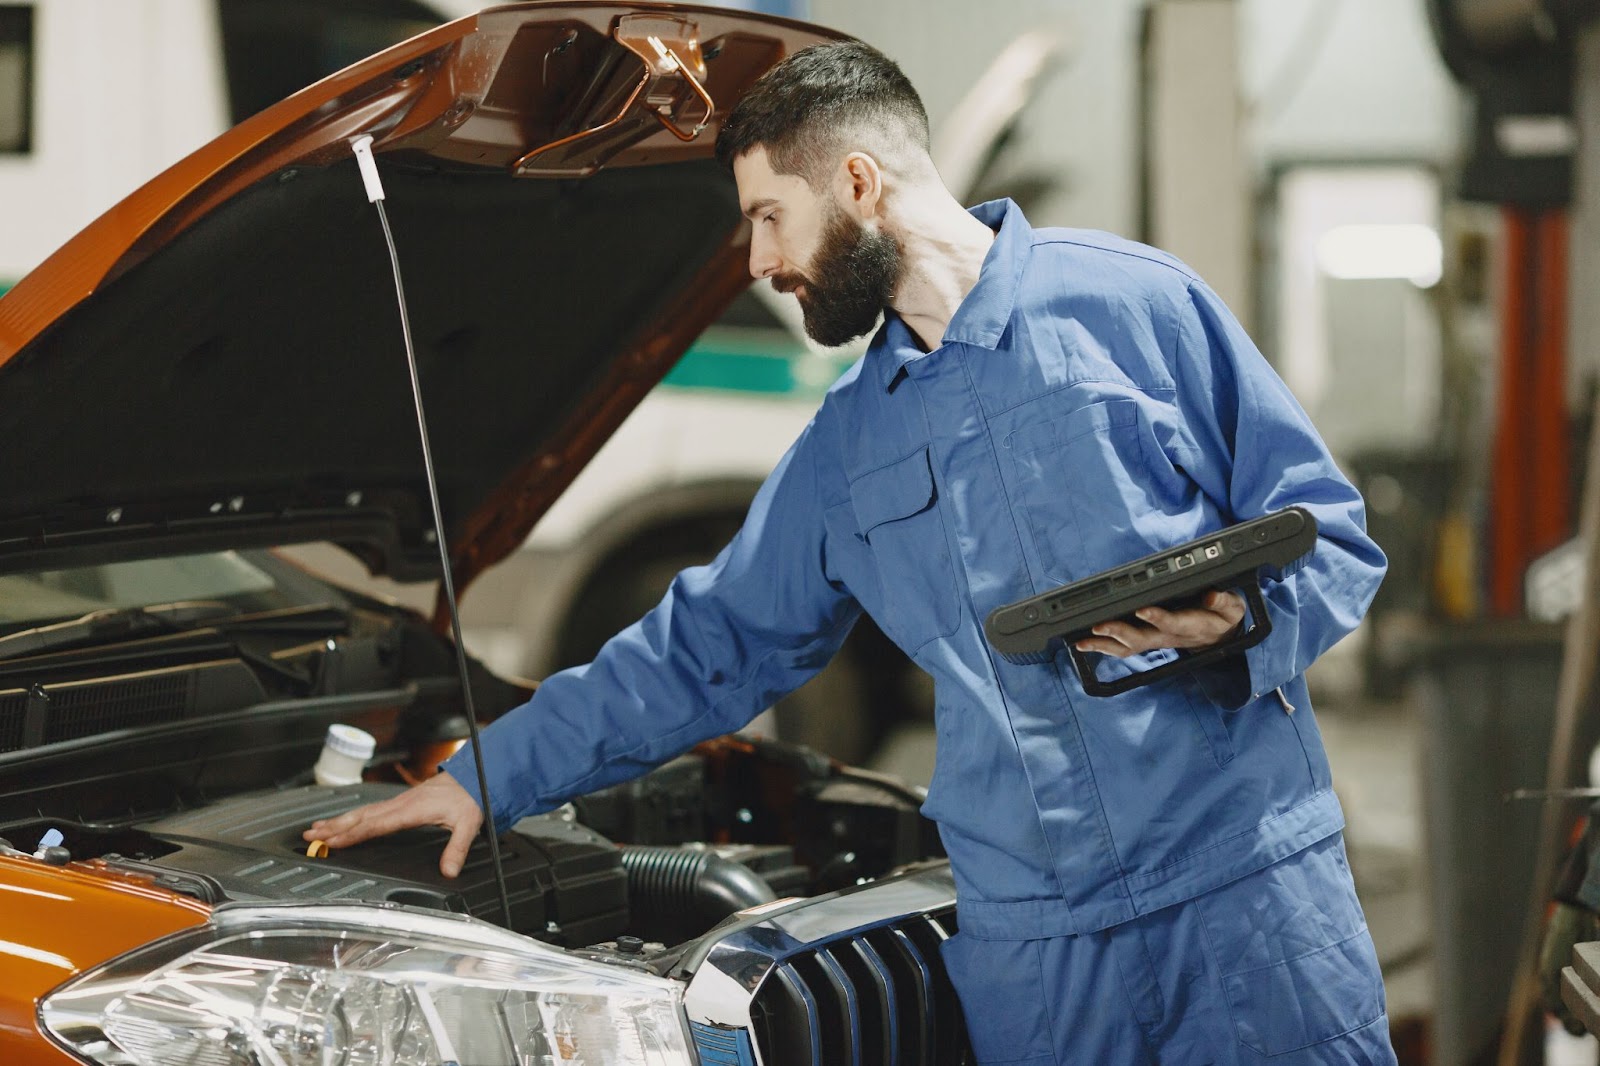 A mechanic checking the engine of a car.